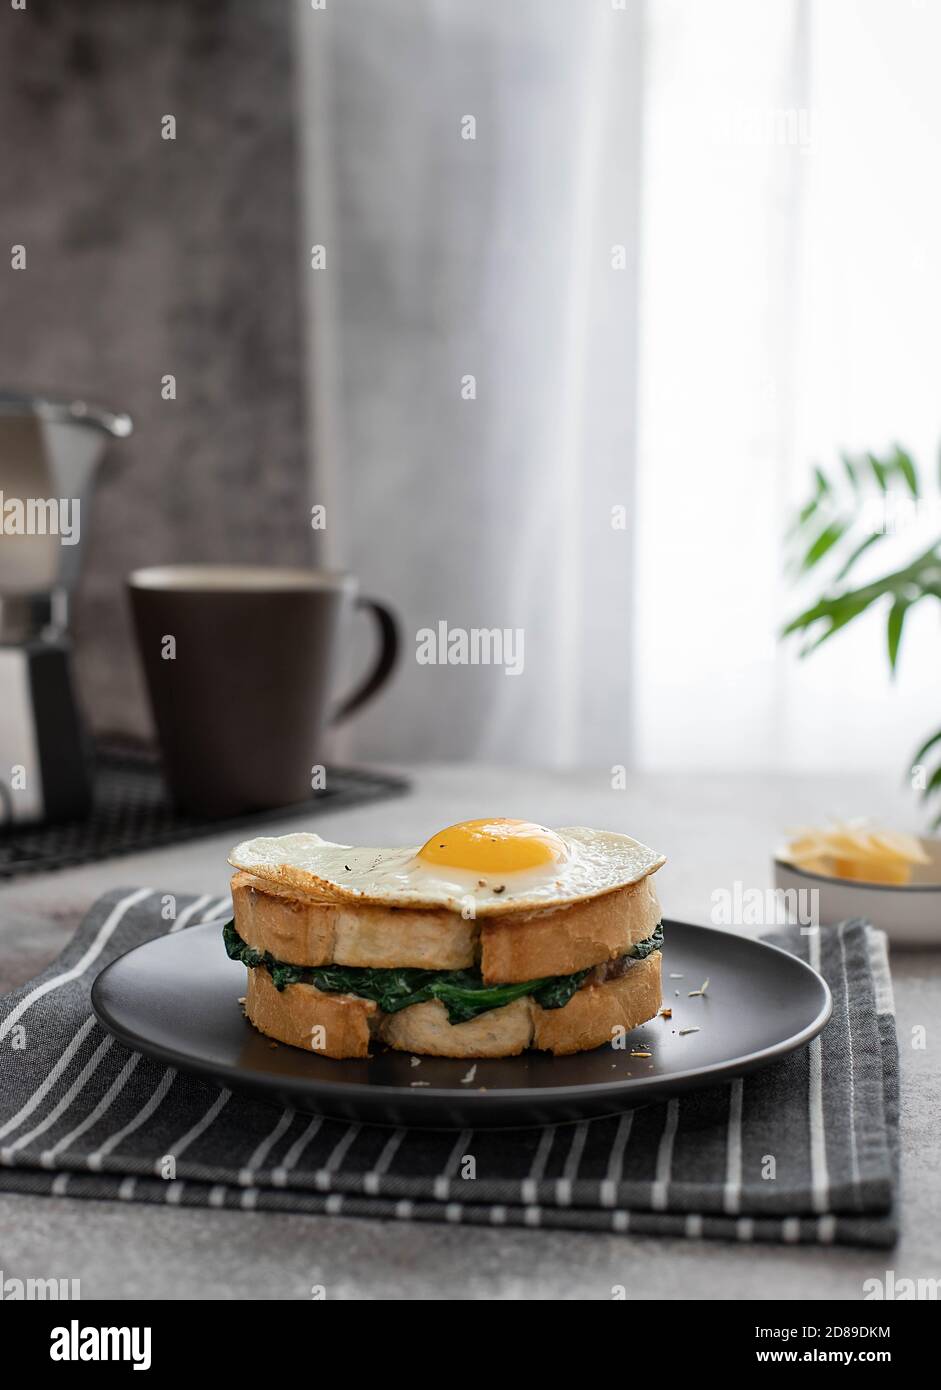 https://c8.alamy.com/comp/2D89DKM/tasty-healthy-sandwich-with-egg-spinach-and-cheese-on-a-dark-plate-coffee-maker-and-cup-with-coffee-2D89DKM.jpg